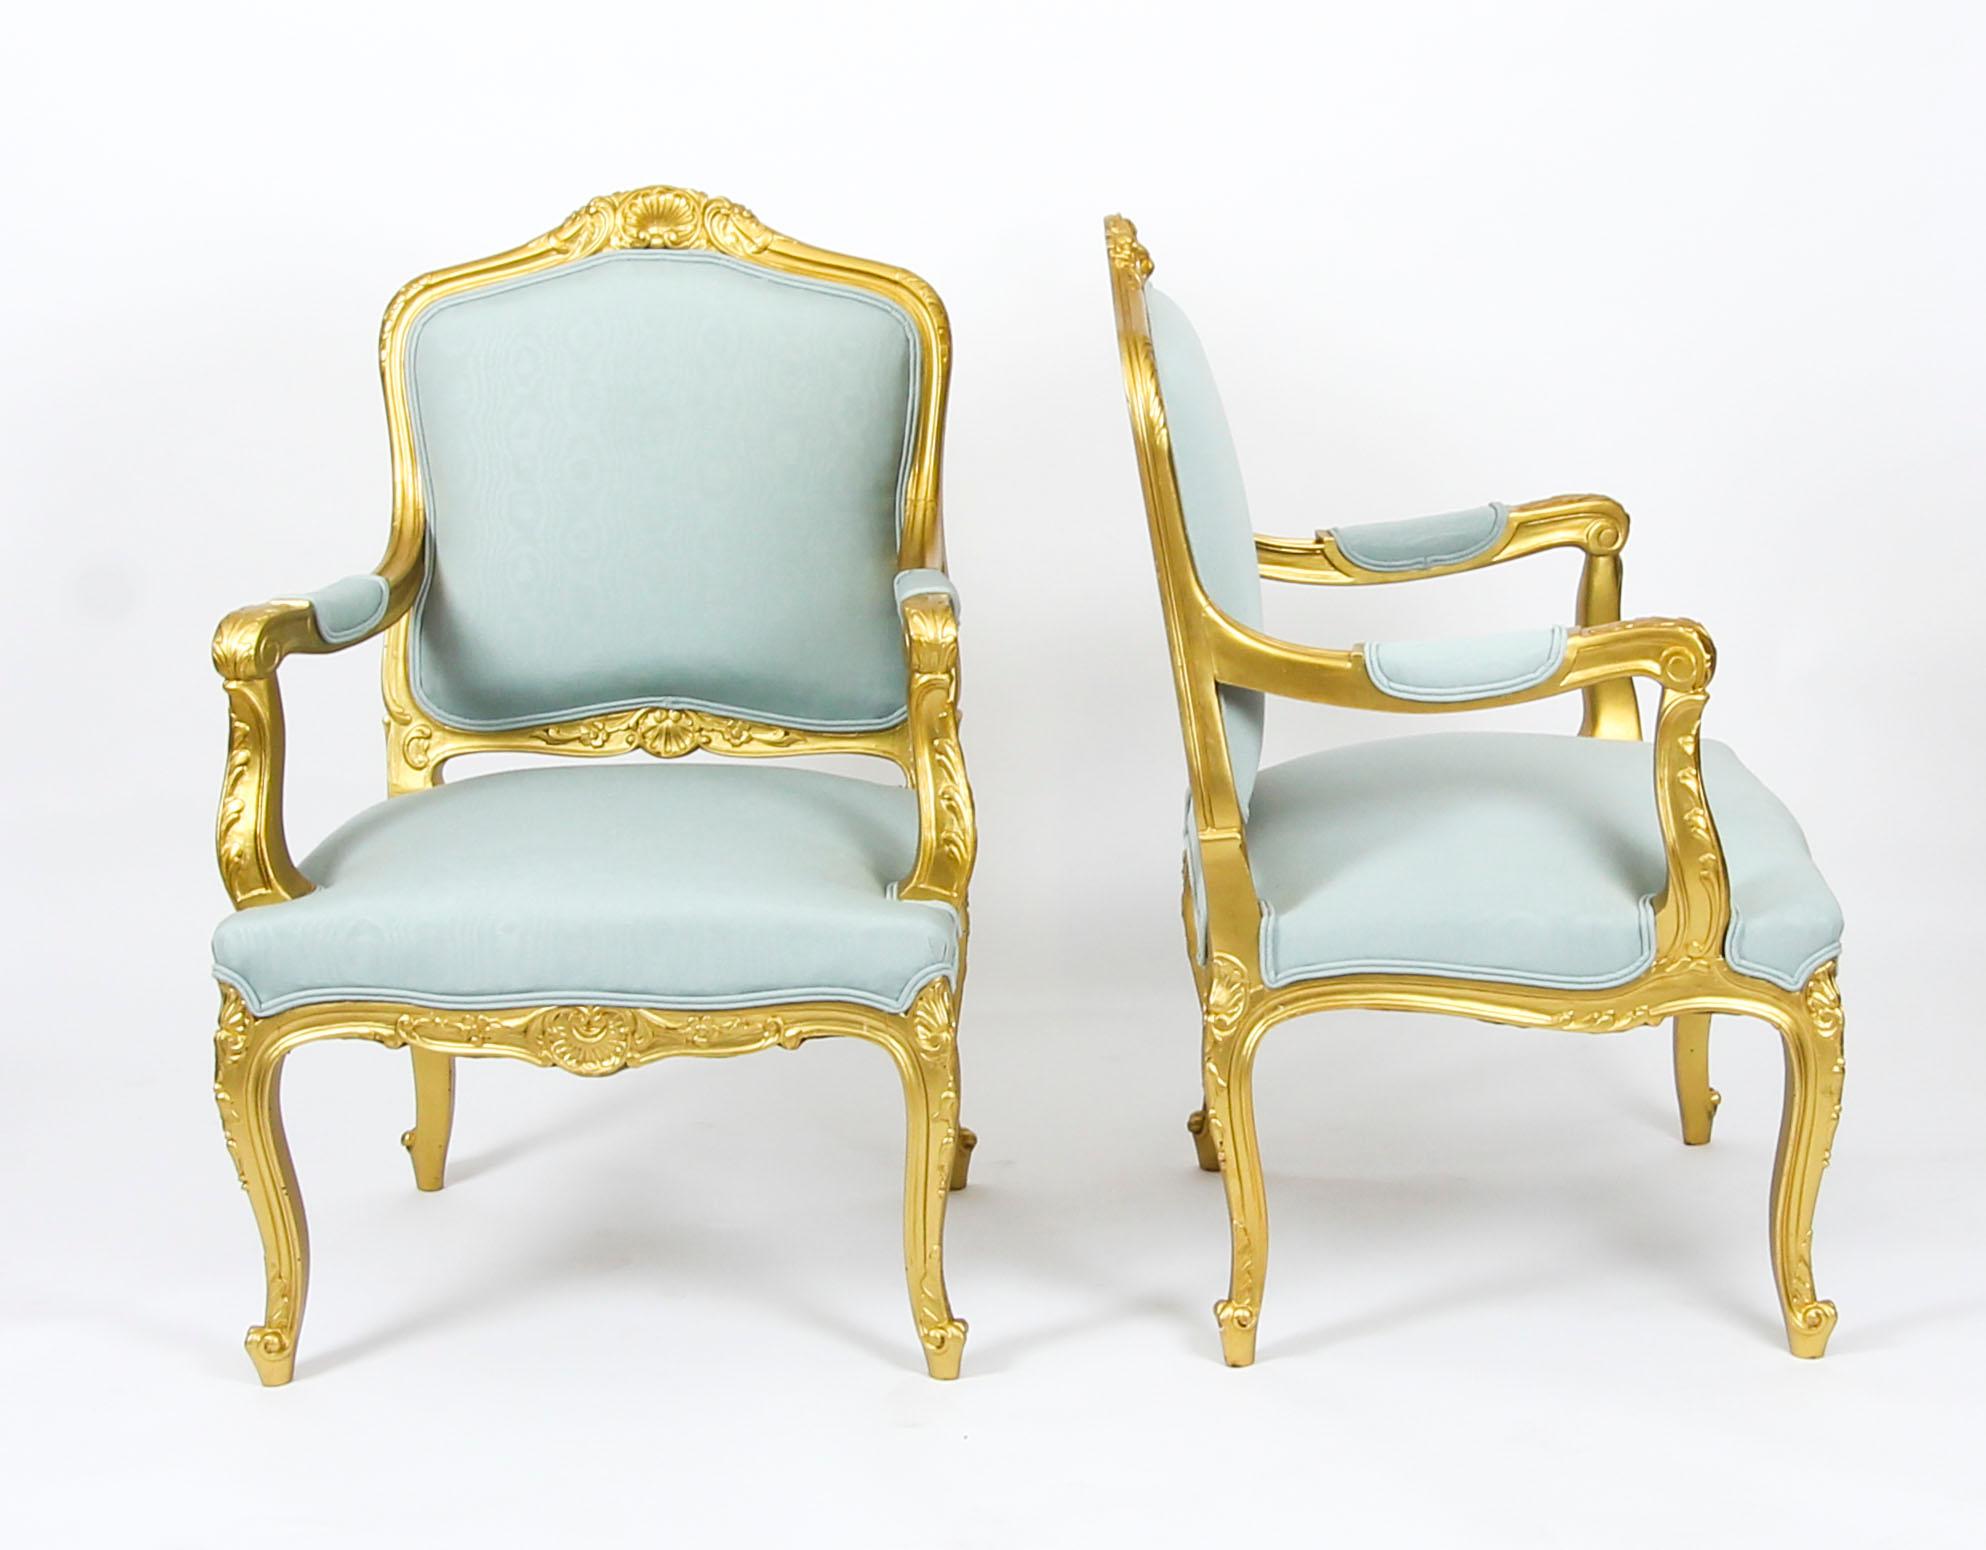 This is a superb set of four antique Louis XVI revival giltwood fauteuils or open armchairs, circa 1880 in date. 

The giltwood is beautiful in colour, each chair features a shell carved crested toprail with acanthus clasped arm padded supports.